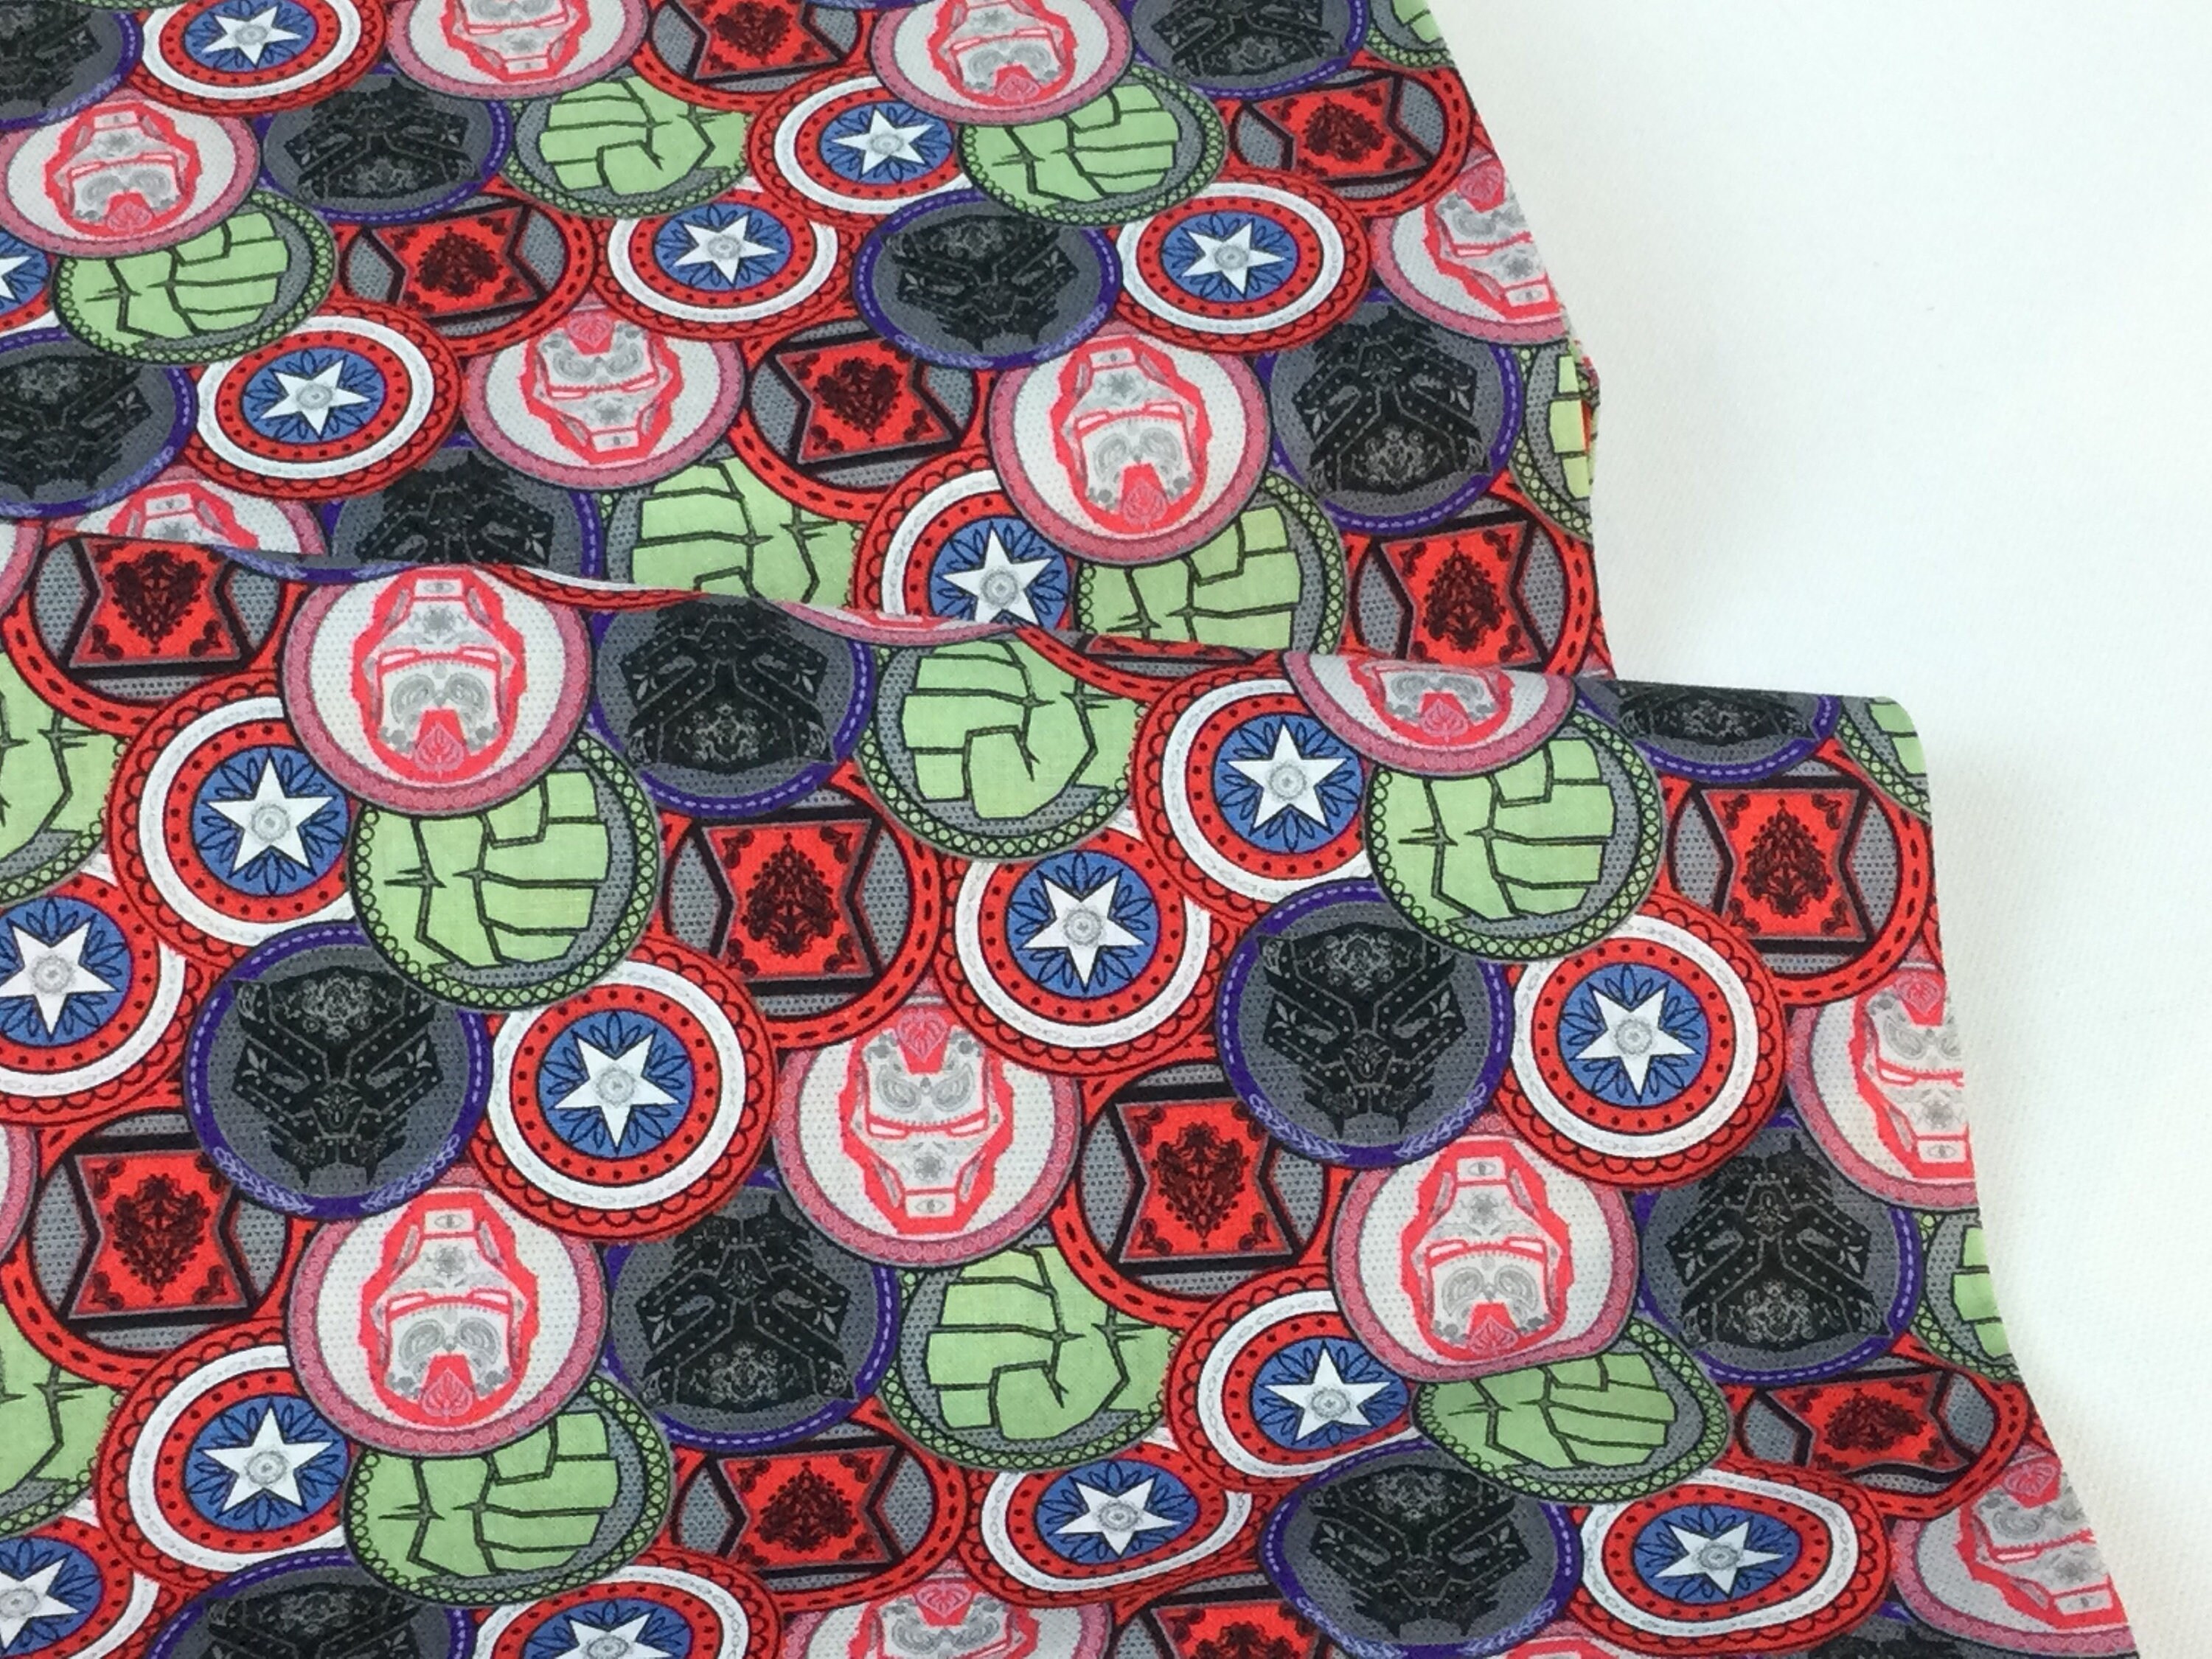 SPRINGS CREATIVE - Spiderman - Comic Swirl - Gray - 71187-A620715  71187-a620715 Quilt Fabric